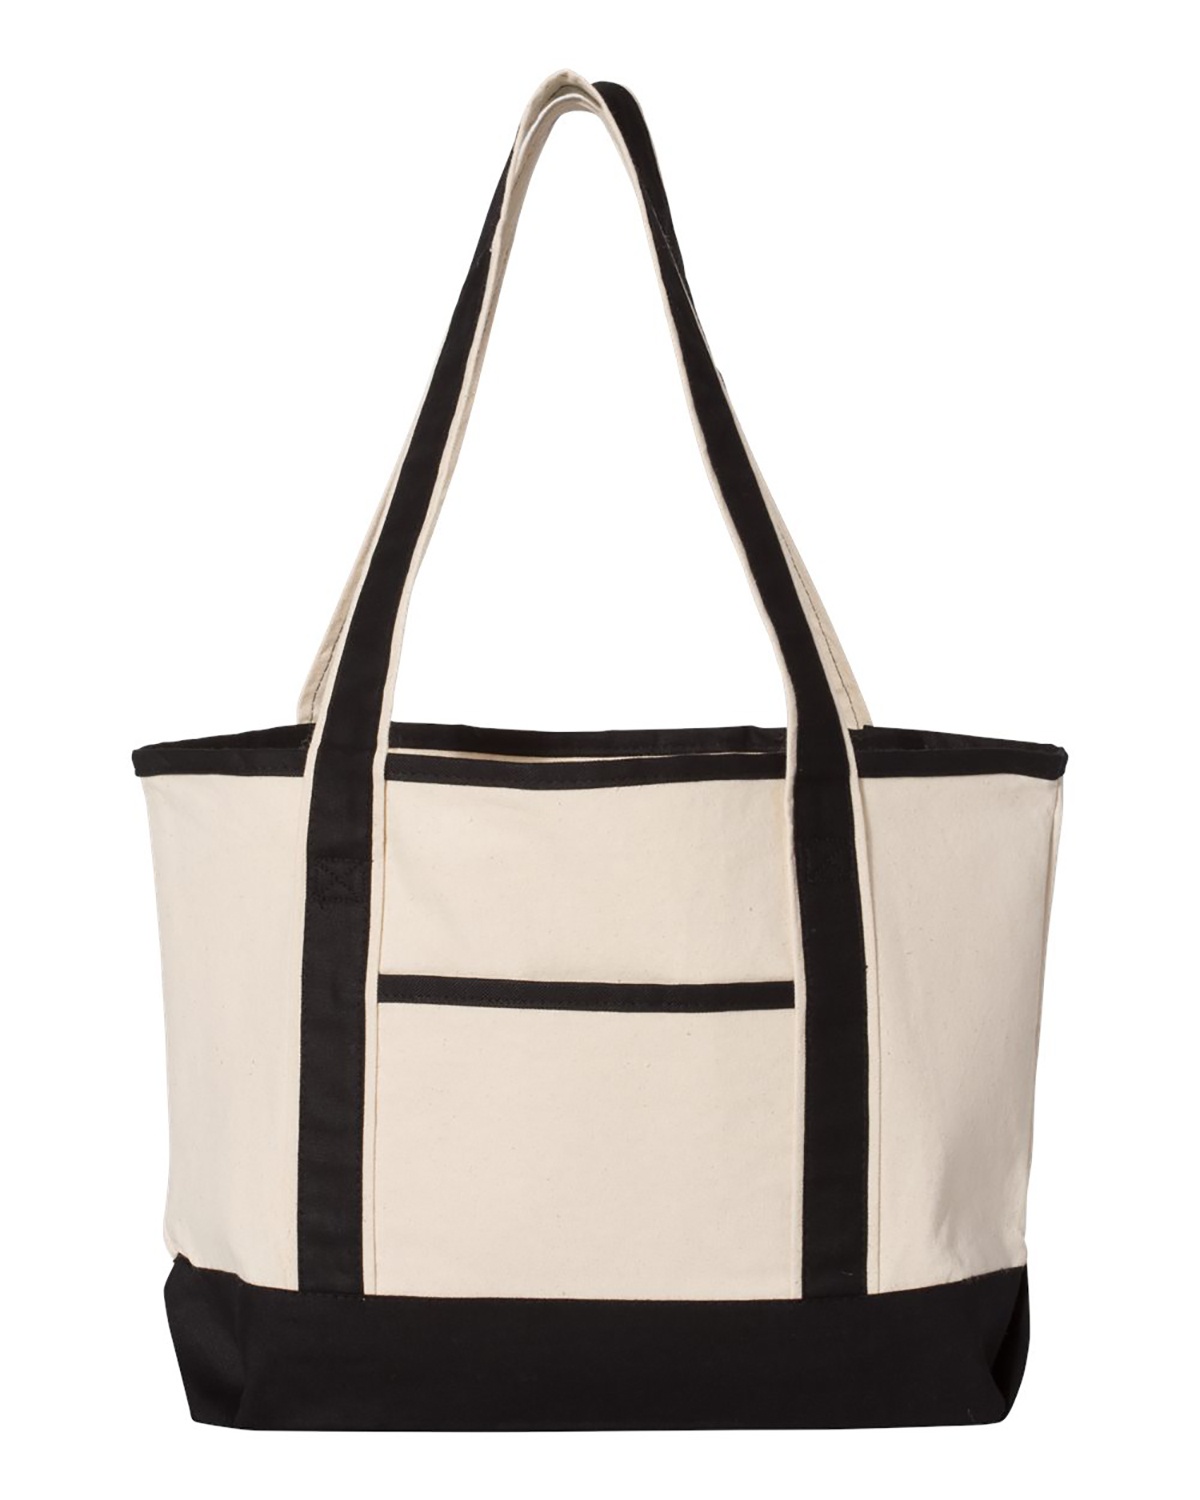 'Q-Tees Q125800 20L Small Canvas Deluxe Tote'